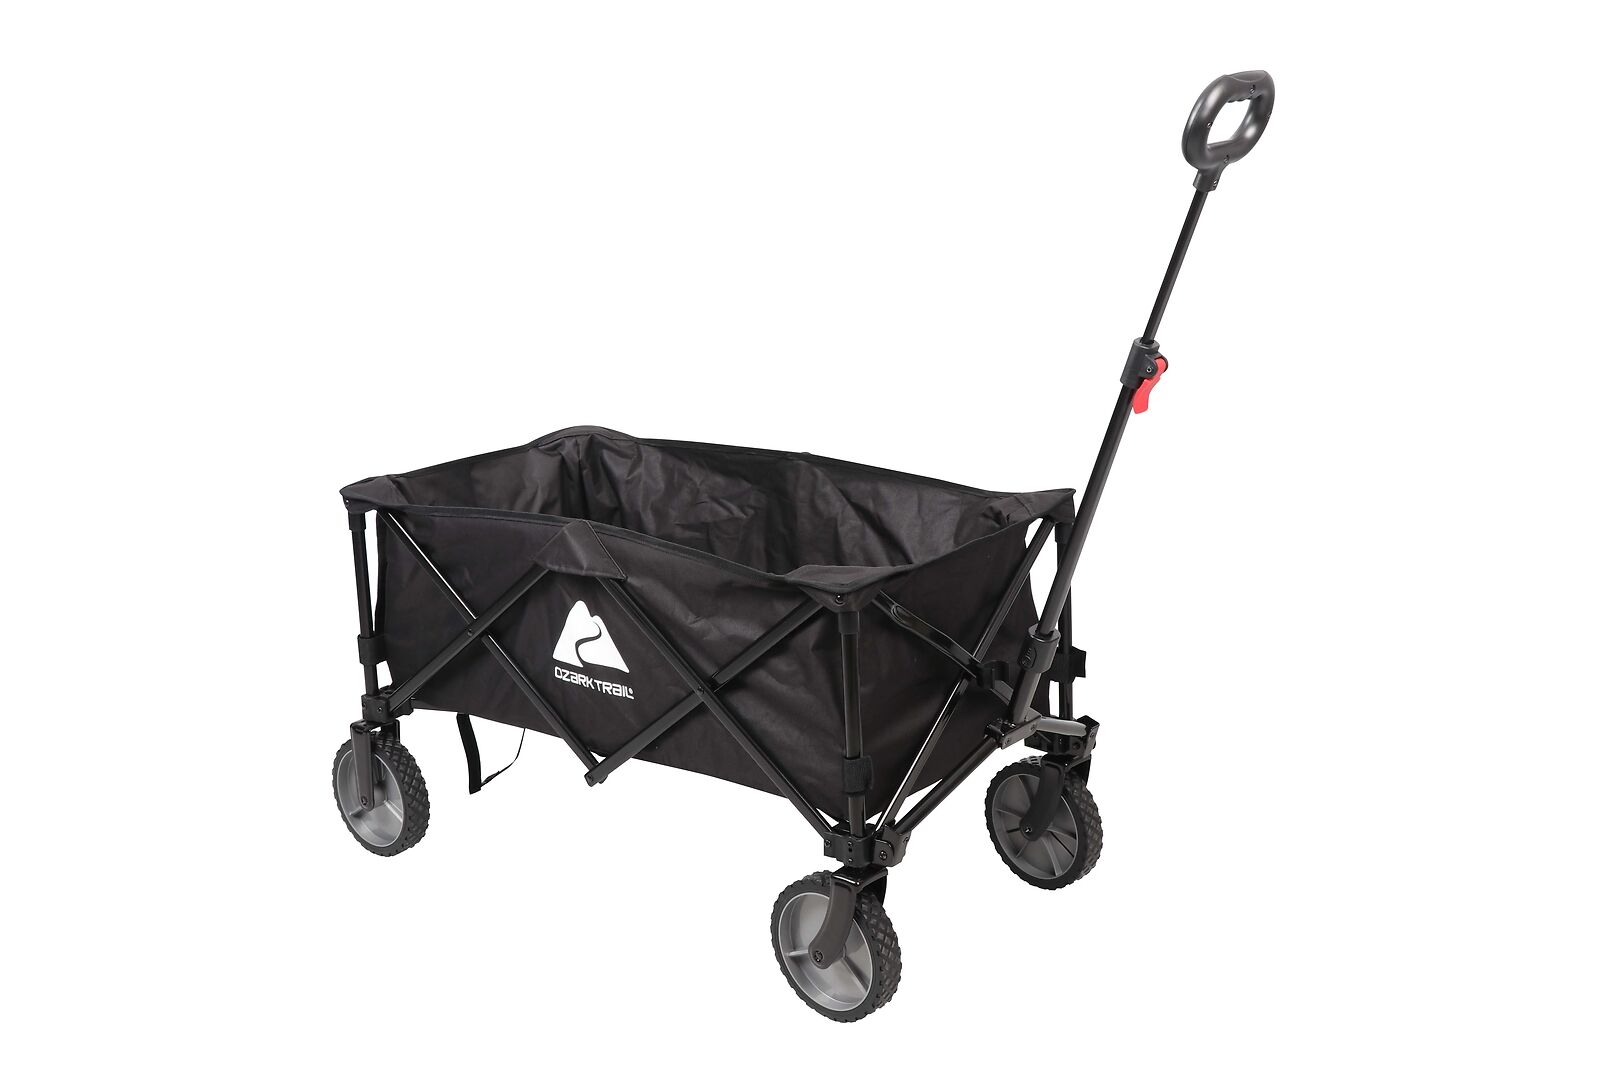 Wagon Folding Cart Collapsible Garden Beach Utility Outdoor Camping Sports Black Does not apply